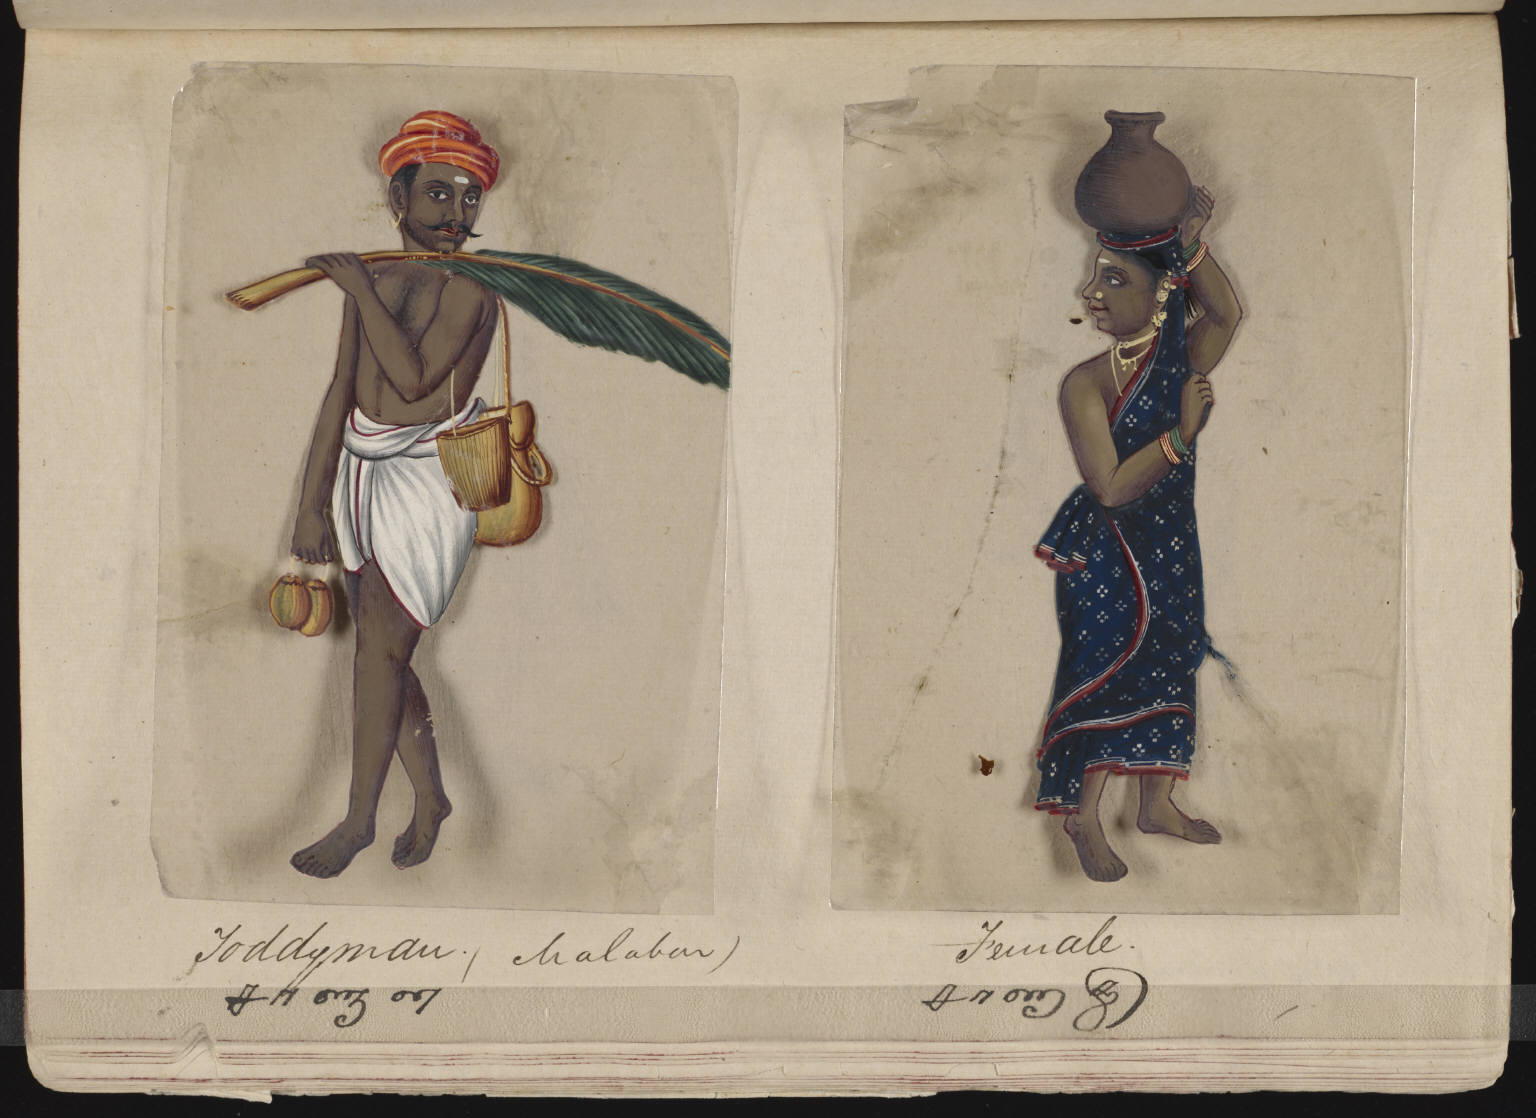 Seventy-two_Specimens_of_Castes_in_India